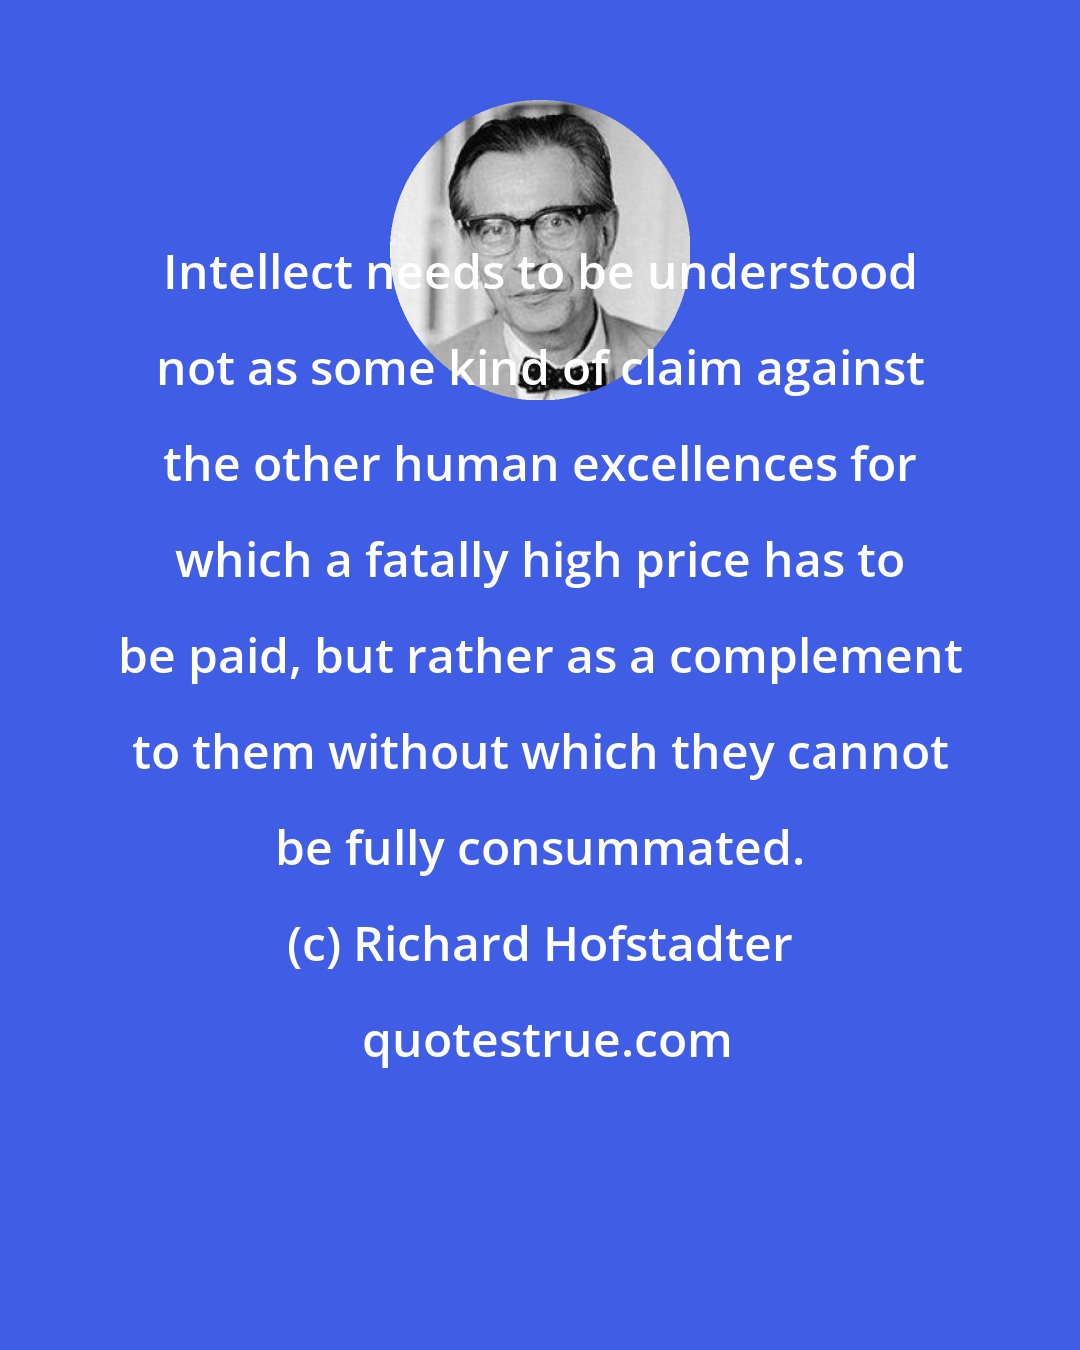 Richard Hofstadter: Intellect needs to be understood not as some kind of claim against the other human excellences for which a fatally high price has to be paid, but rather as a complement to them without which they cannot be fully consummated.